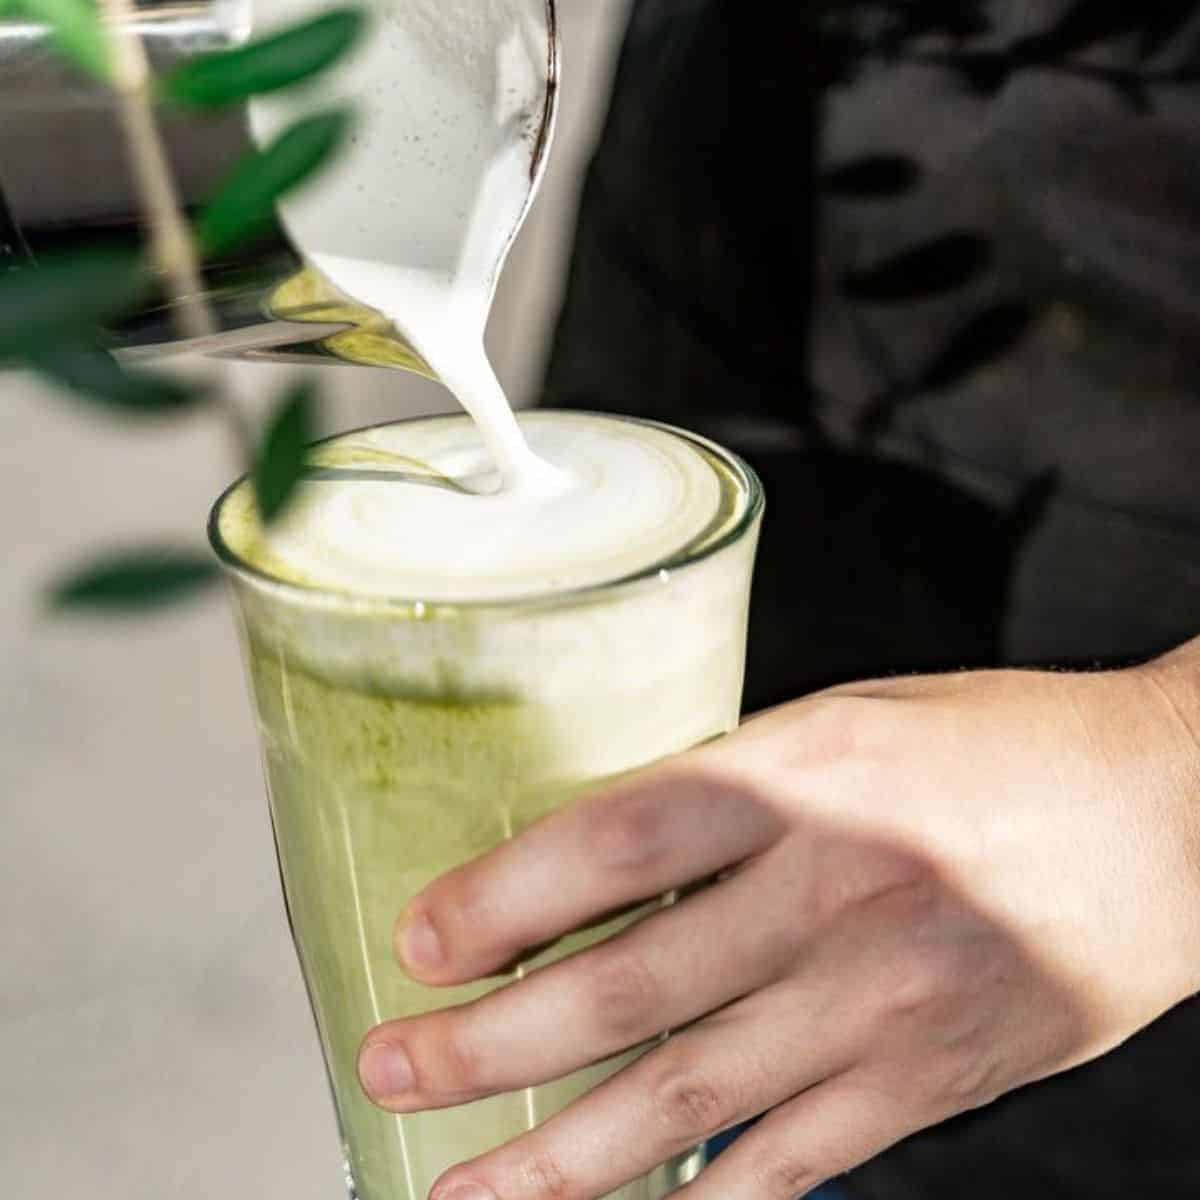 A person pouring out milk in the glass of a green tea beverage